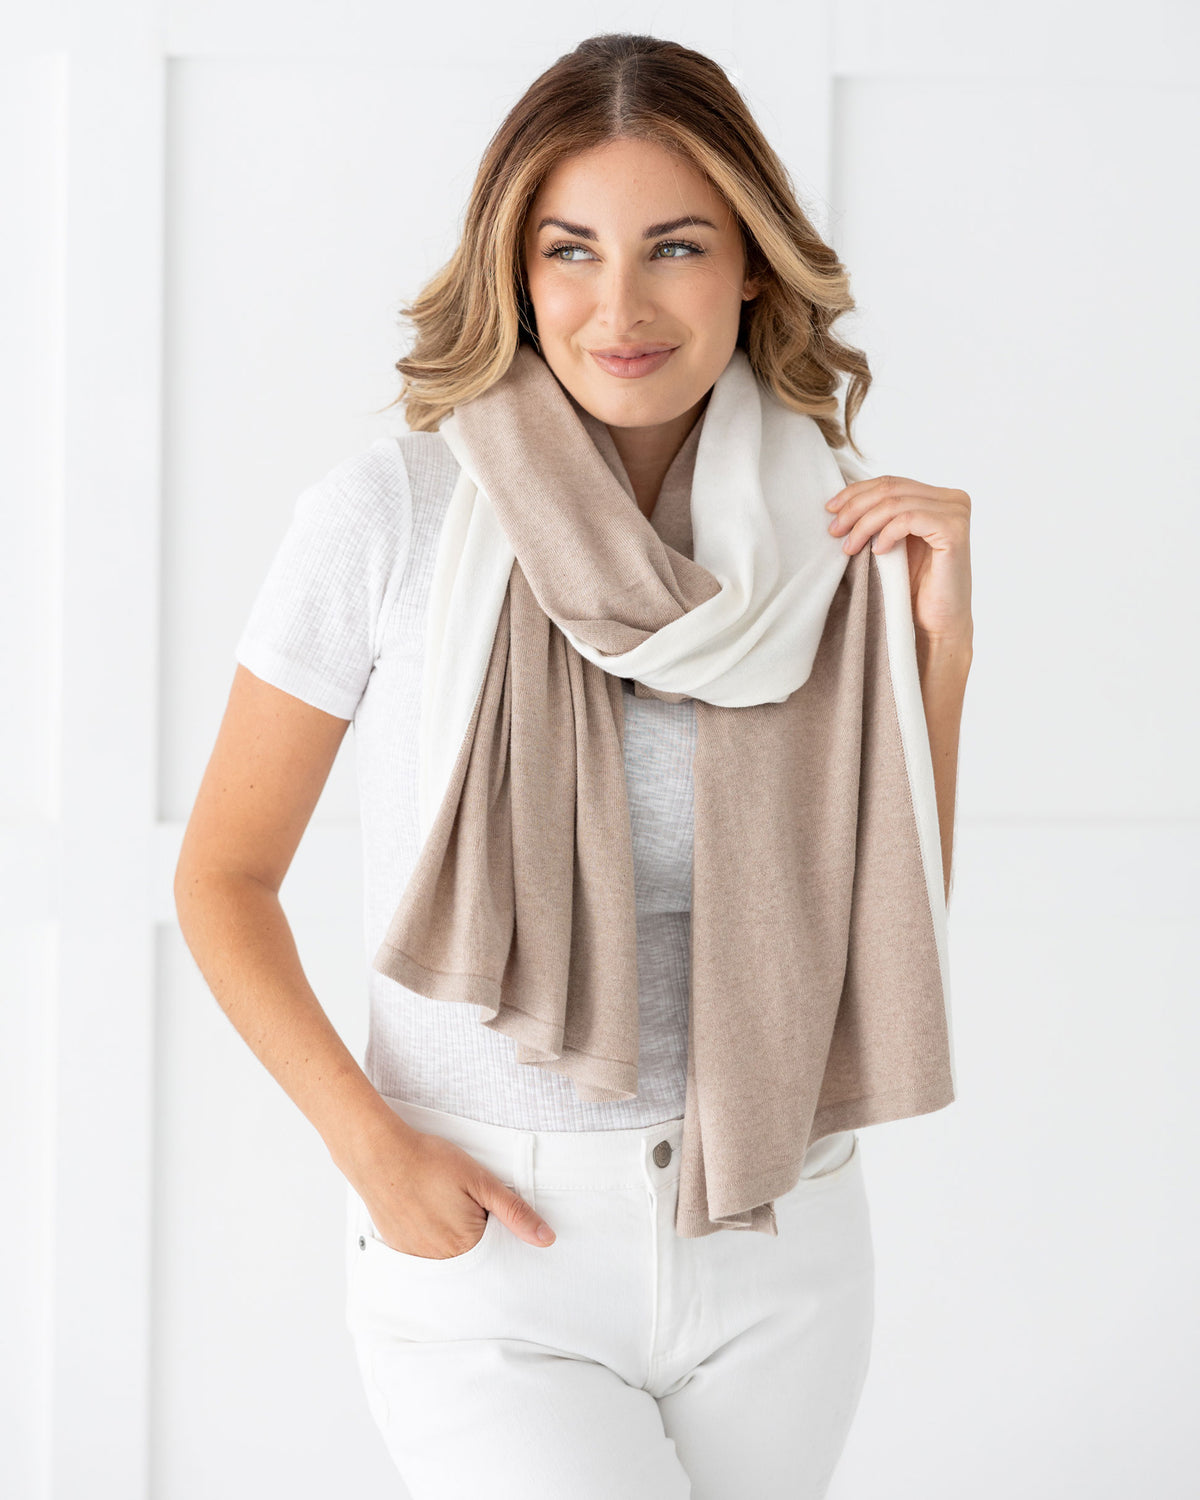 Woman wearing the Cashmere Cotton Luxe Travel Scarf in Sandstone and Ivory Colorblock which is a tan and cream scarf, worn as a modern loop style